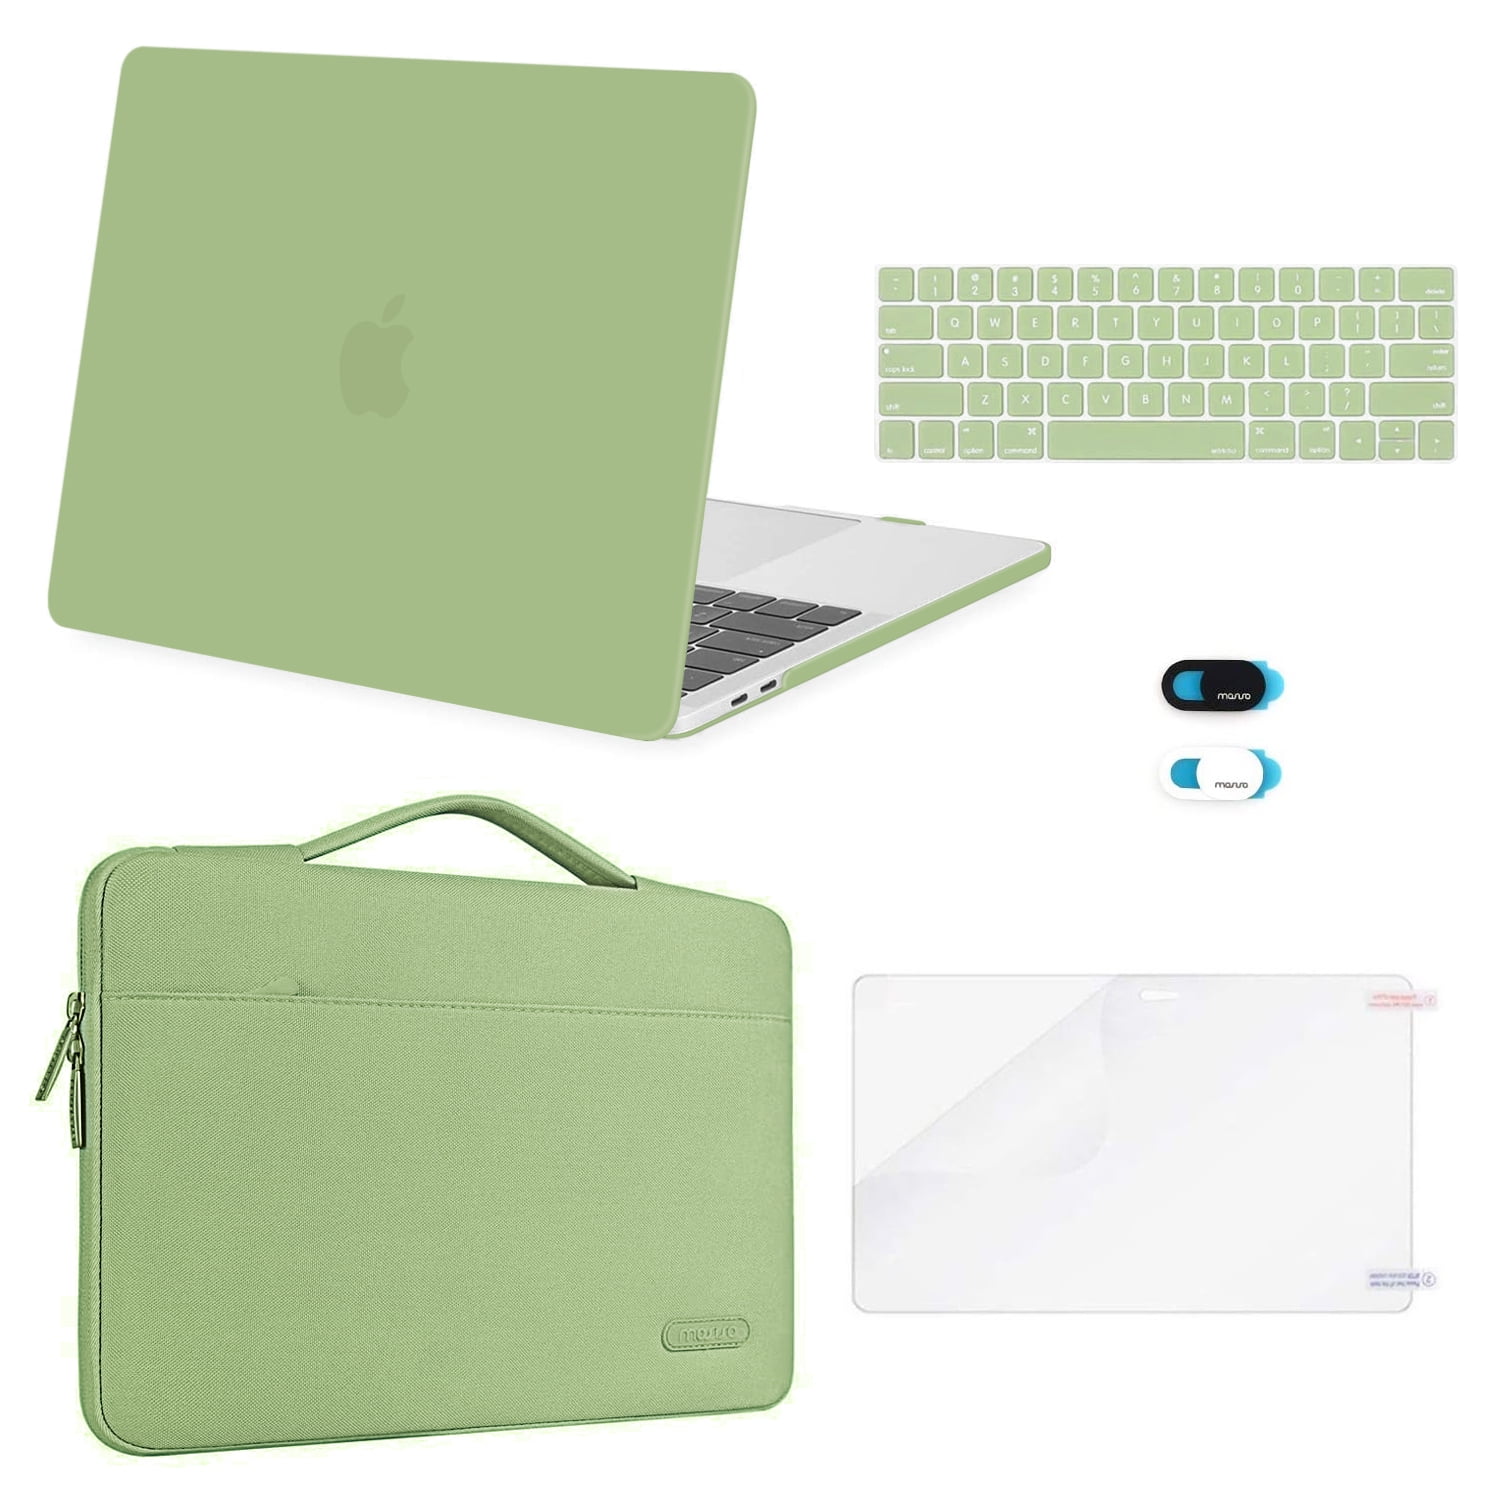 Zipper Sleeve Bag+Hard Case+Keyboard Cover for Macbook Pro 13 15" Touch Bar 2016 